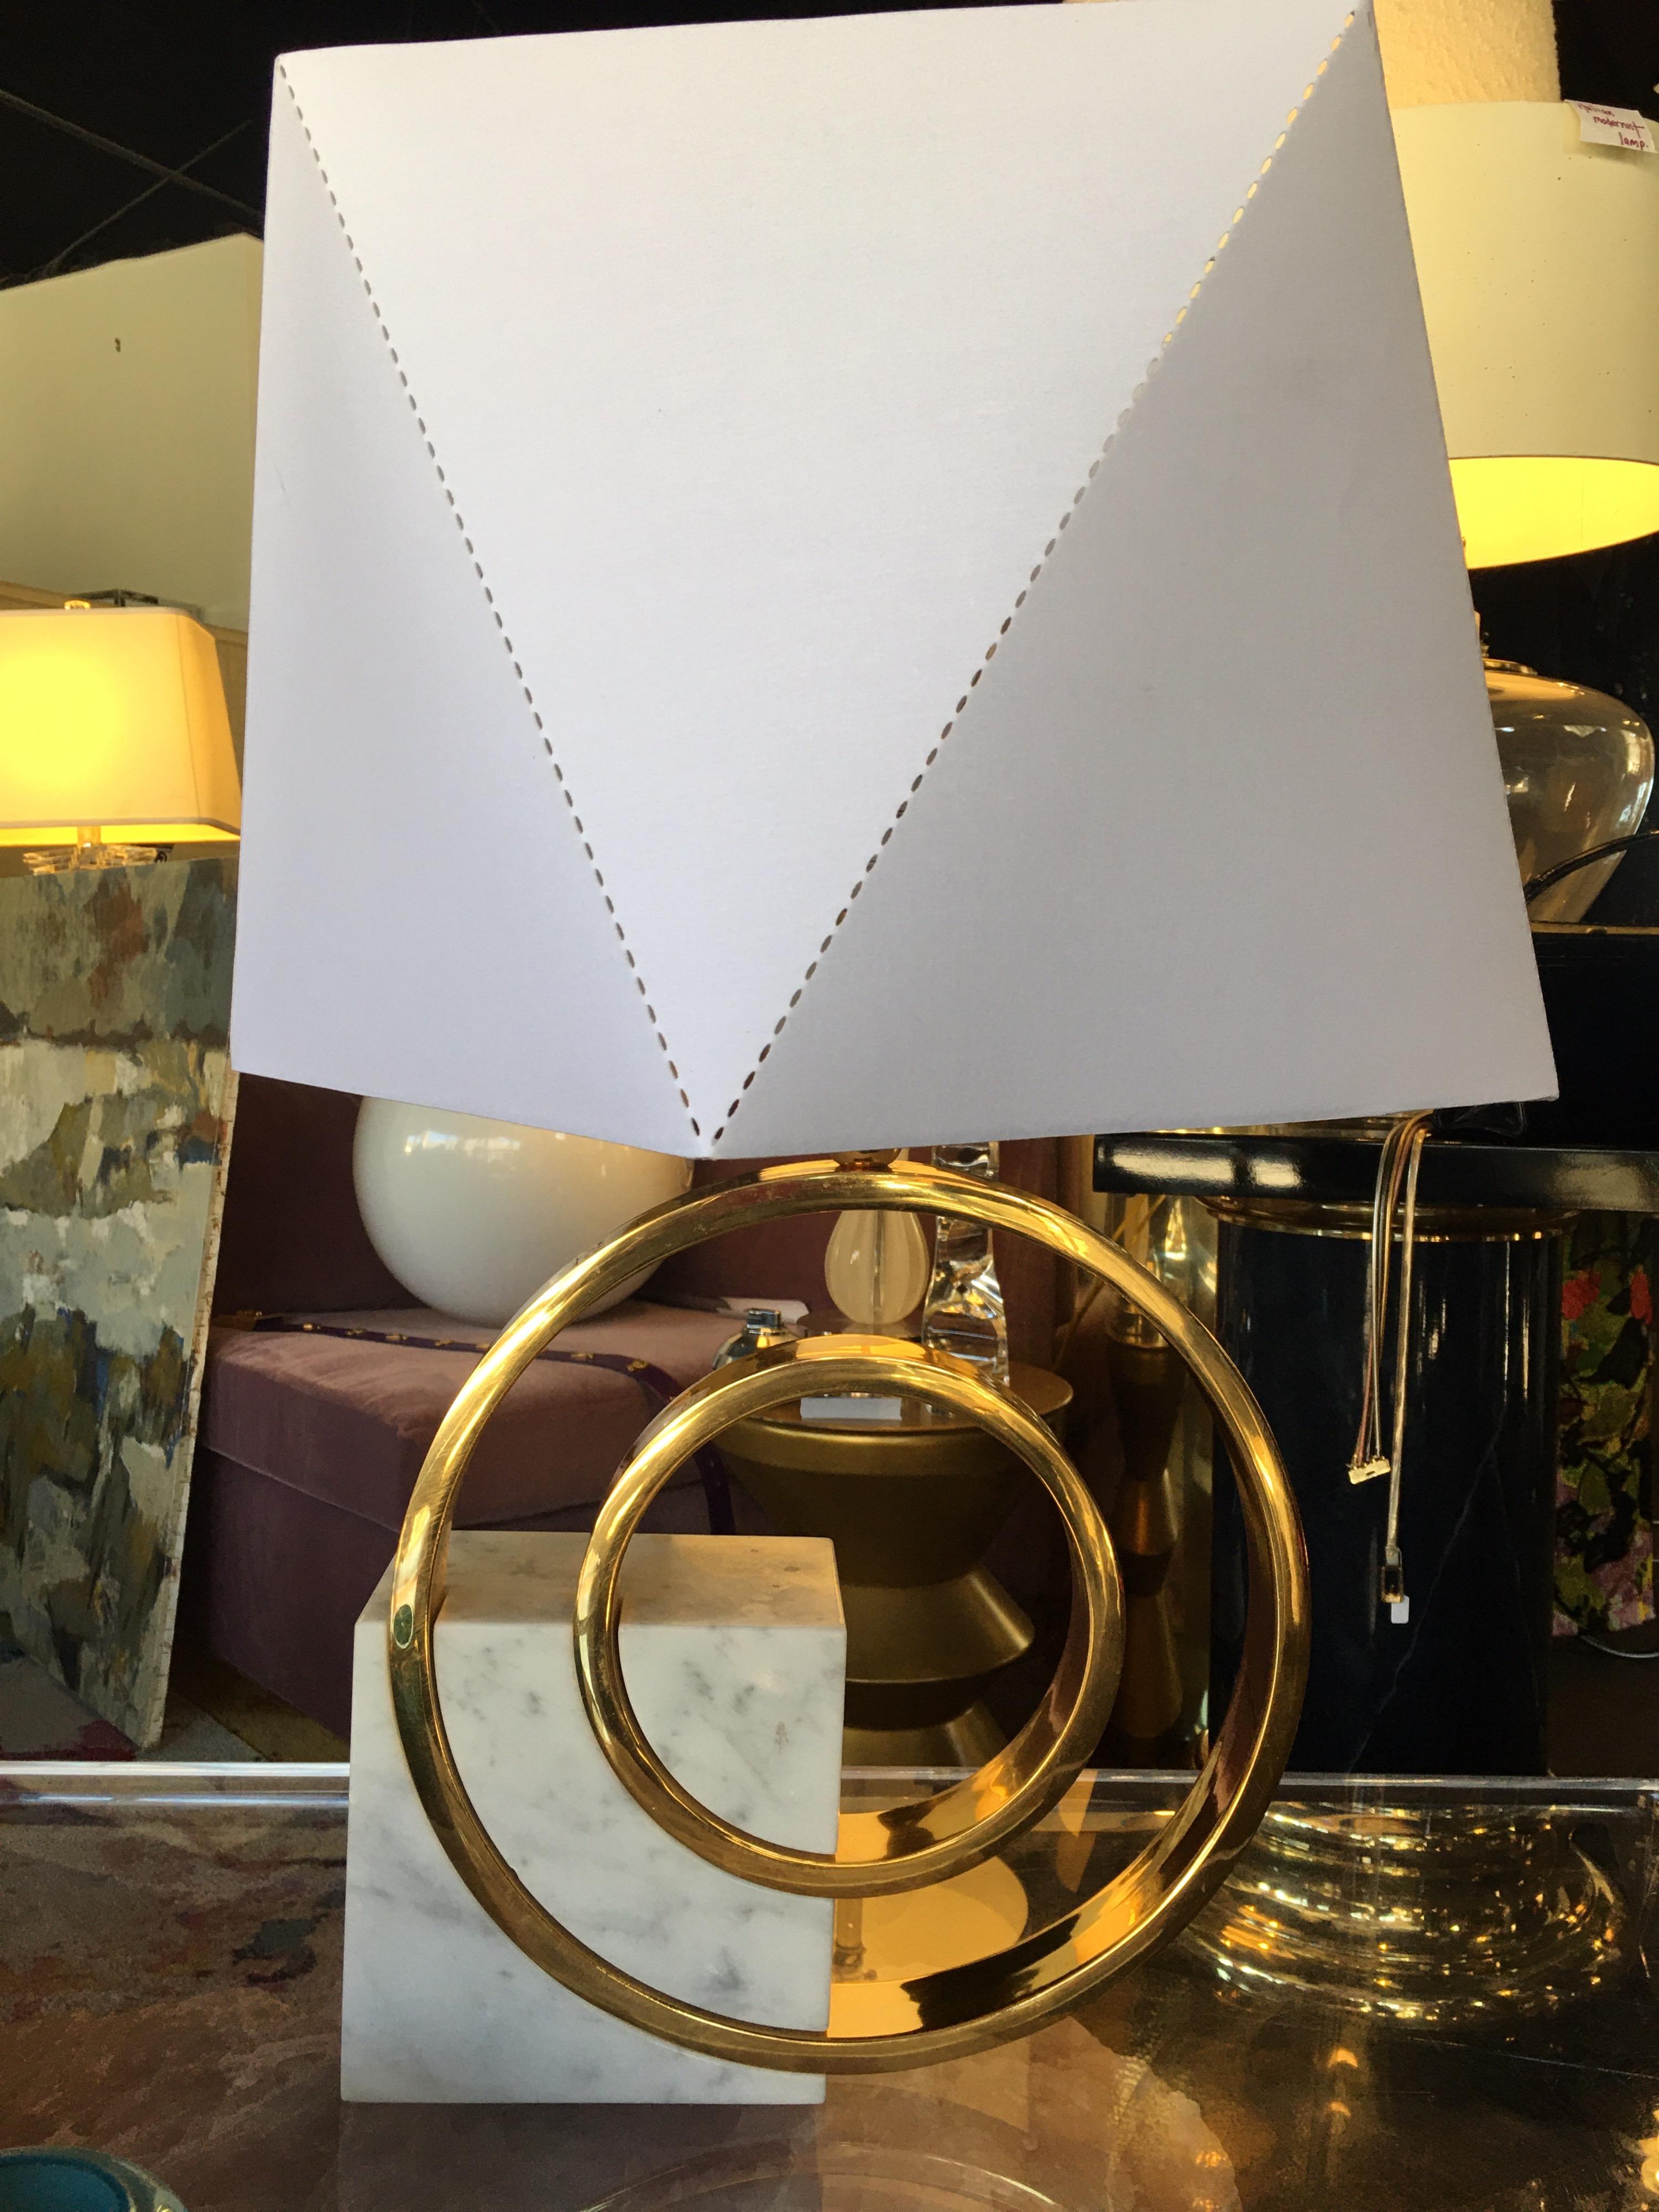 This is very rare and beautiful Italian modern lamp was designed by Giovani Banci in the 1970s. This lamp is made of white Carrara marble and beautiful brass. A new custom shade has been made for the lamp in the style of geometric modern art. From a